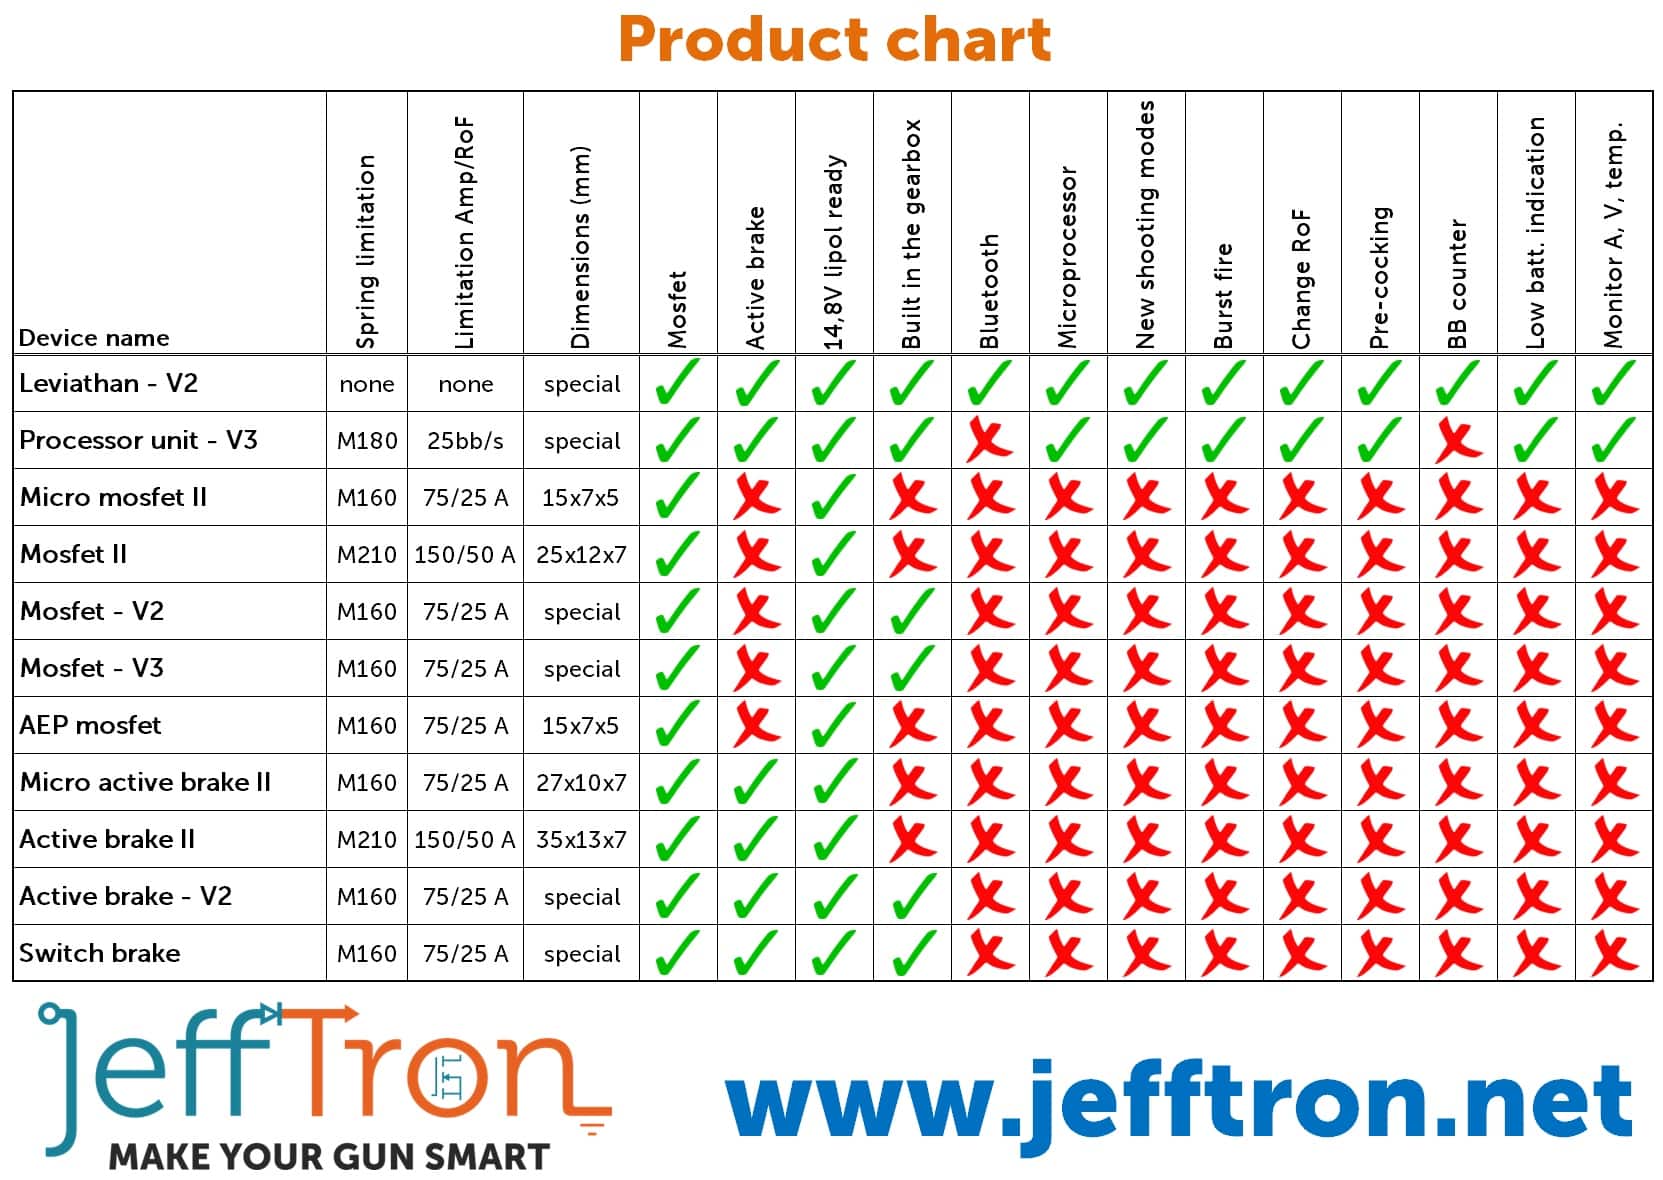 Jefftron Mosfet II (high Draw Mosfet)